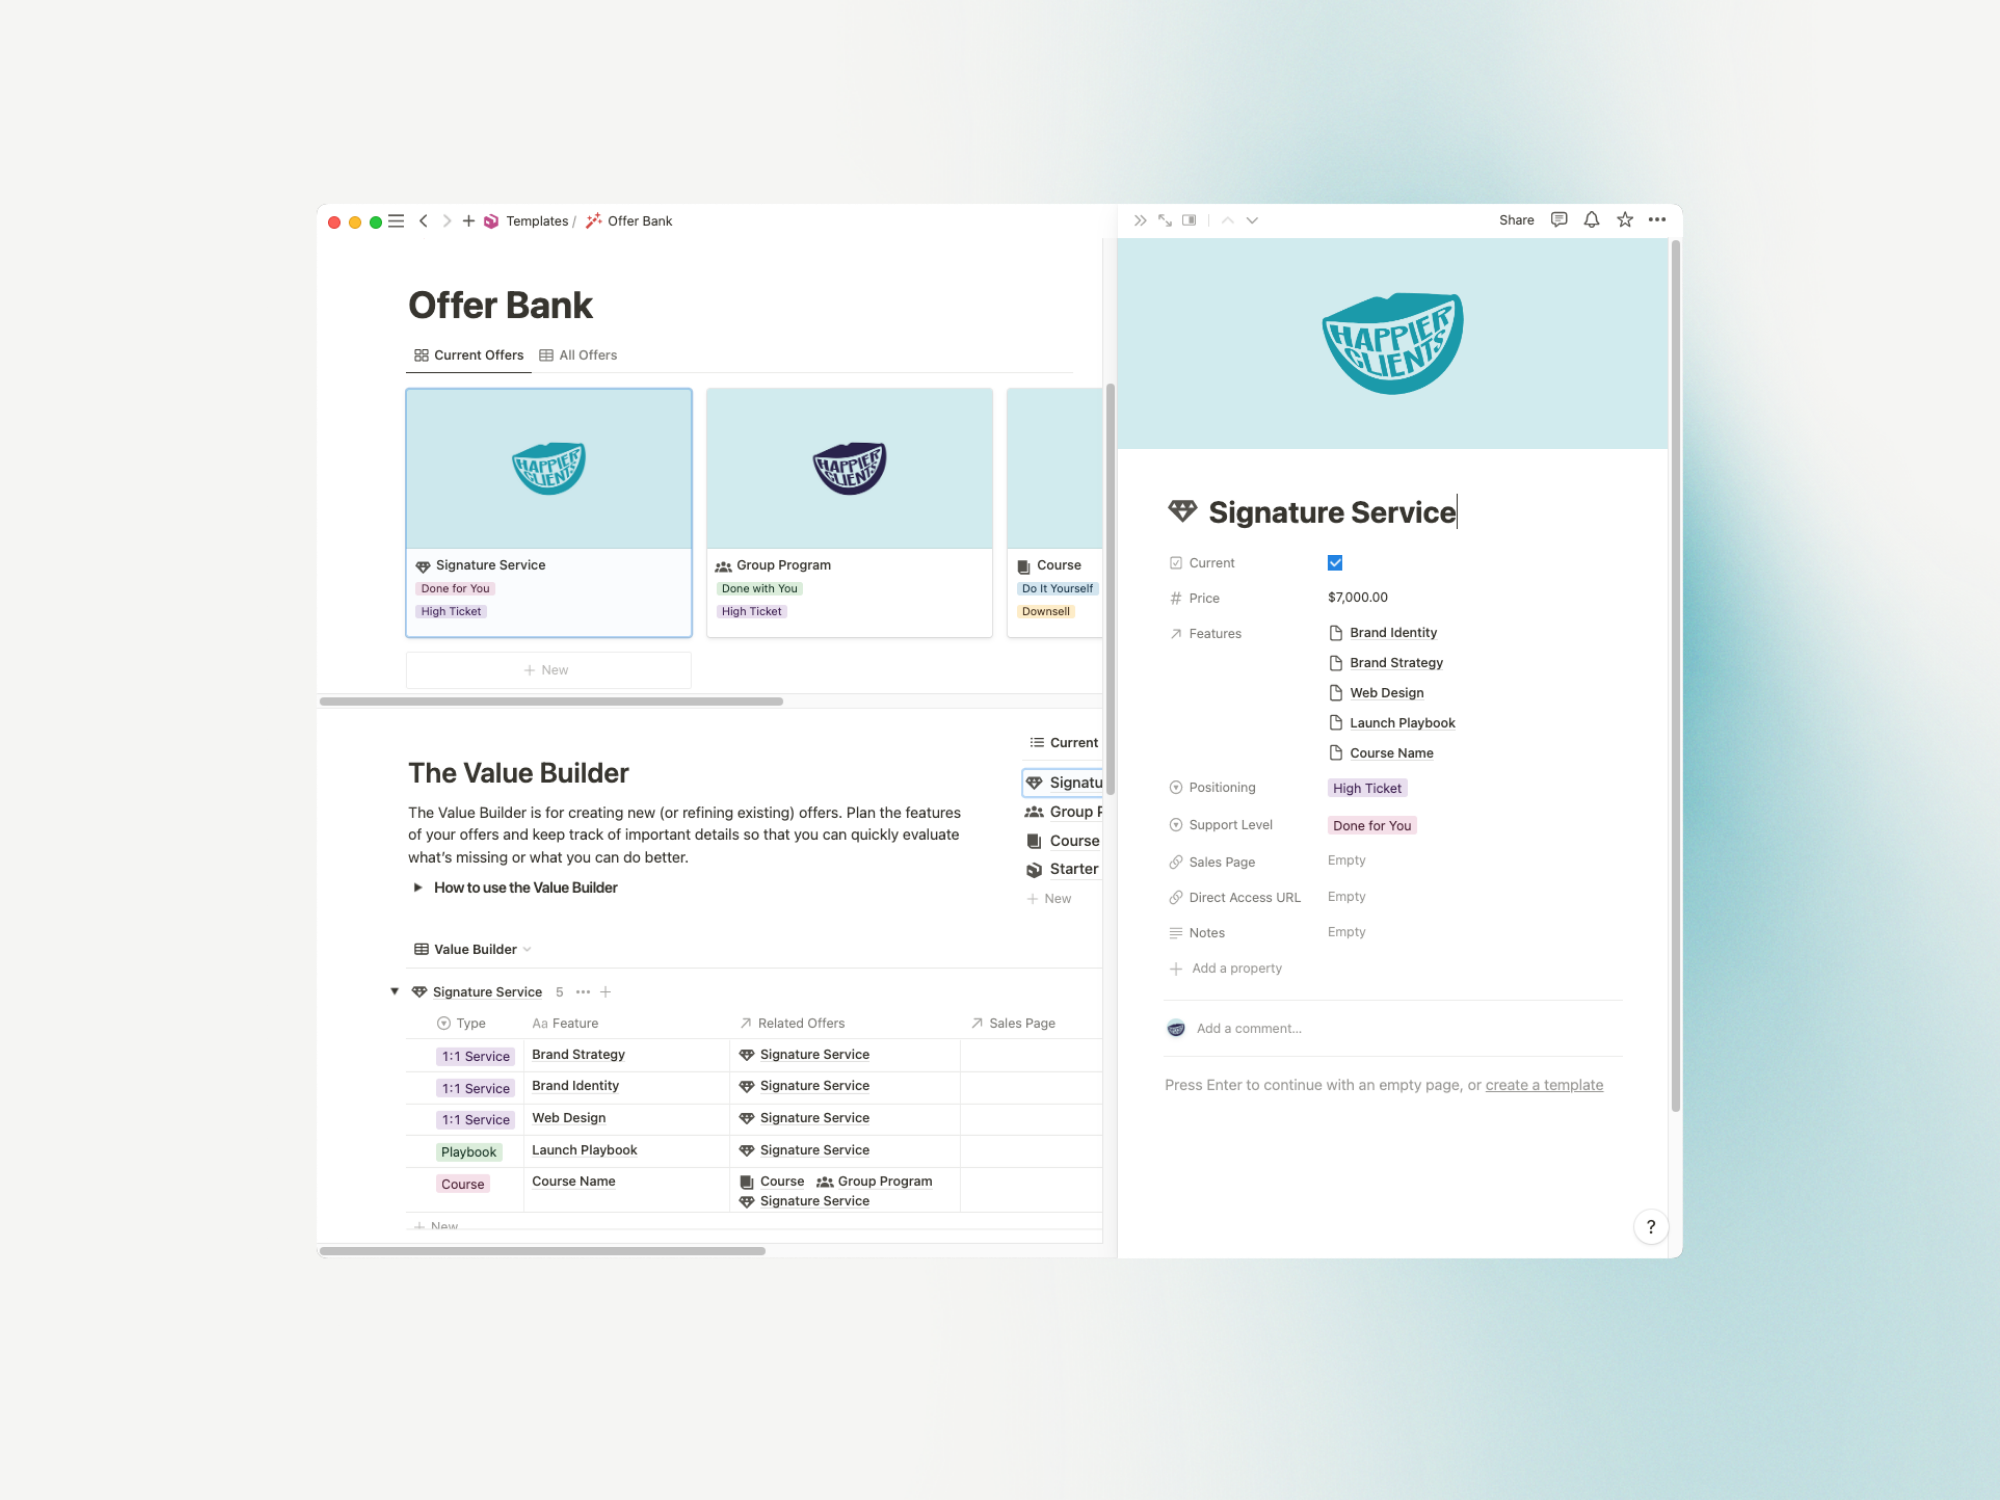 Create a Signature Service with Complementary Offers to streamline and scale your creative business without sacrificing time with this Offer Builder template.